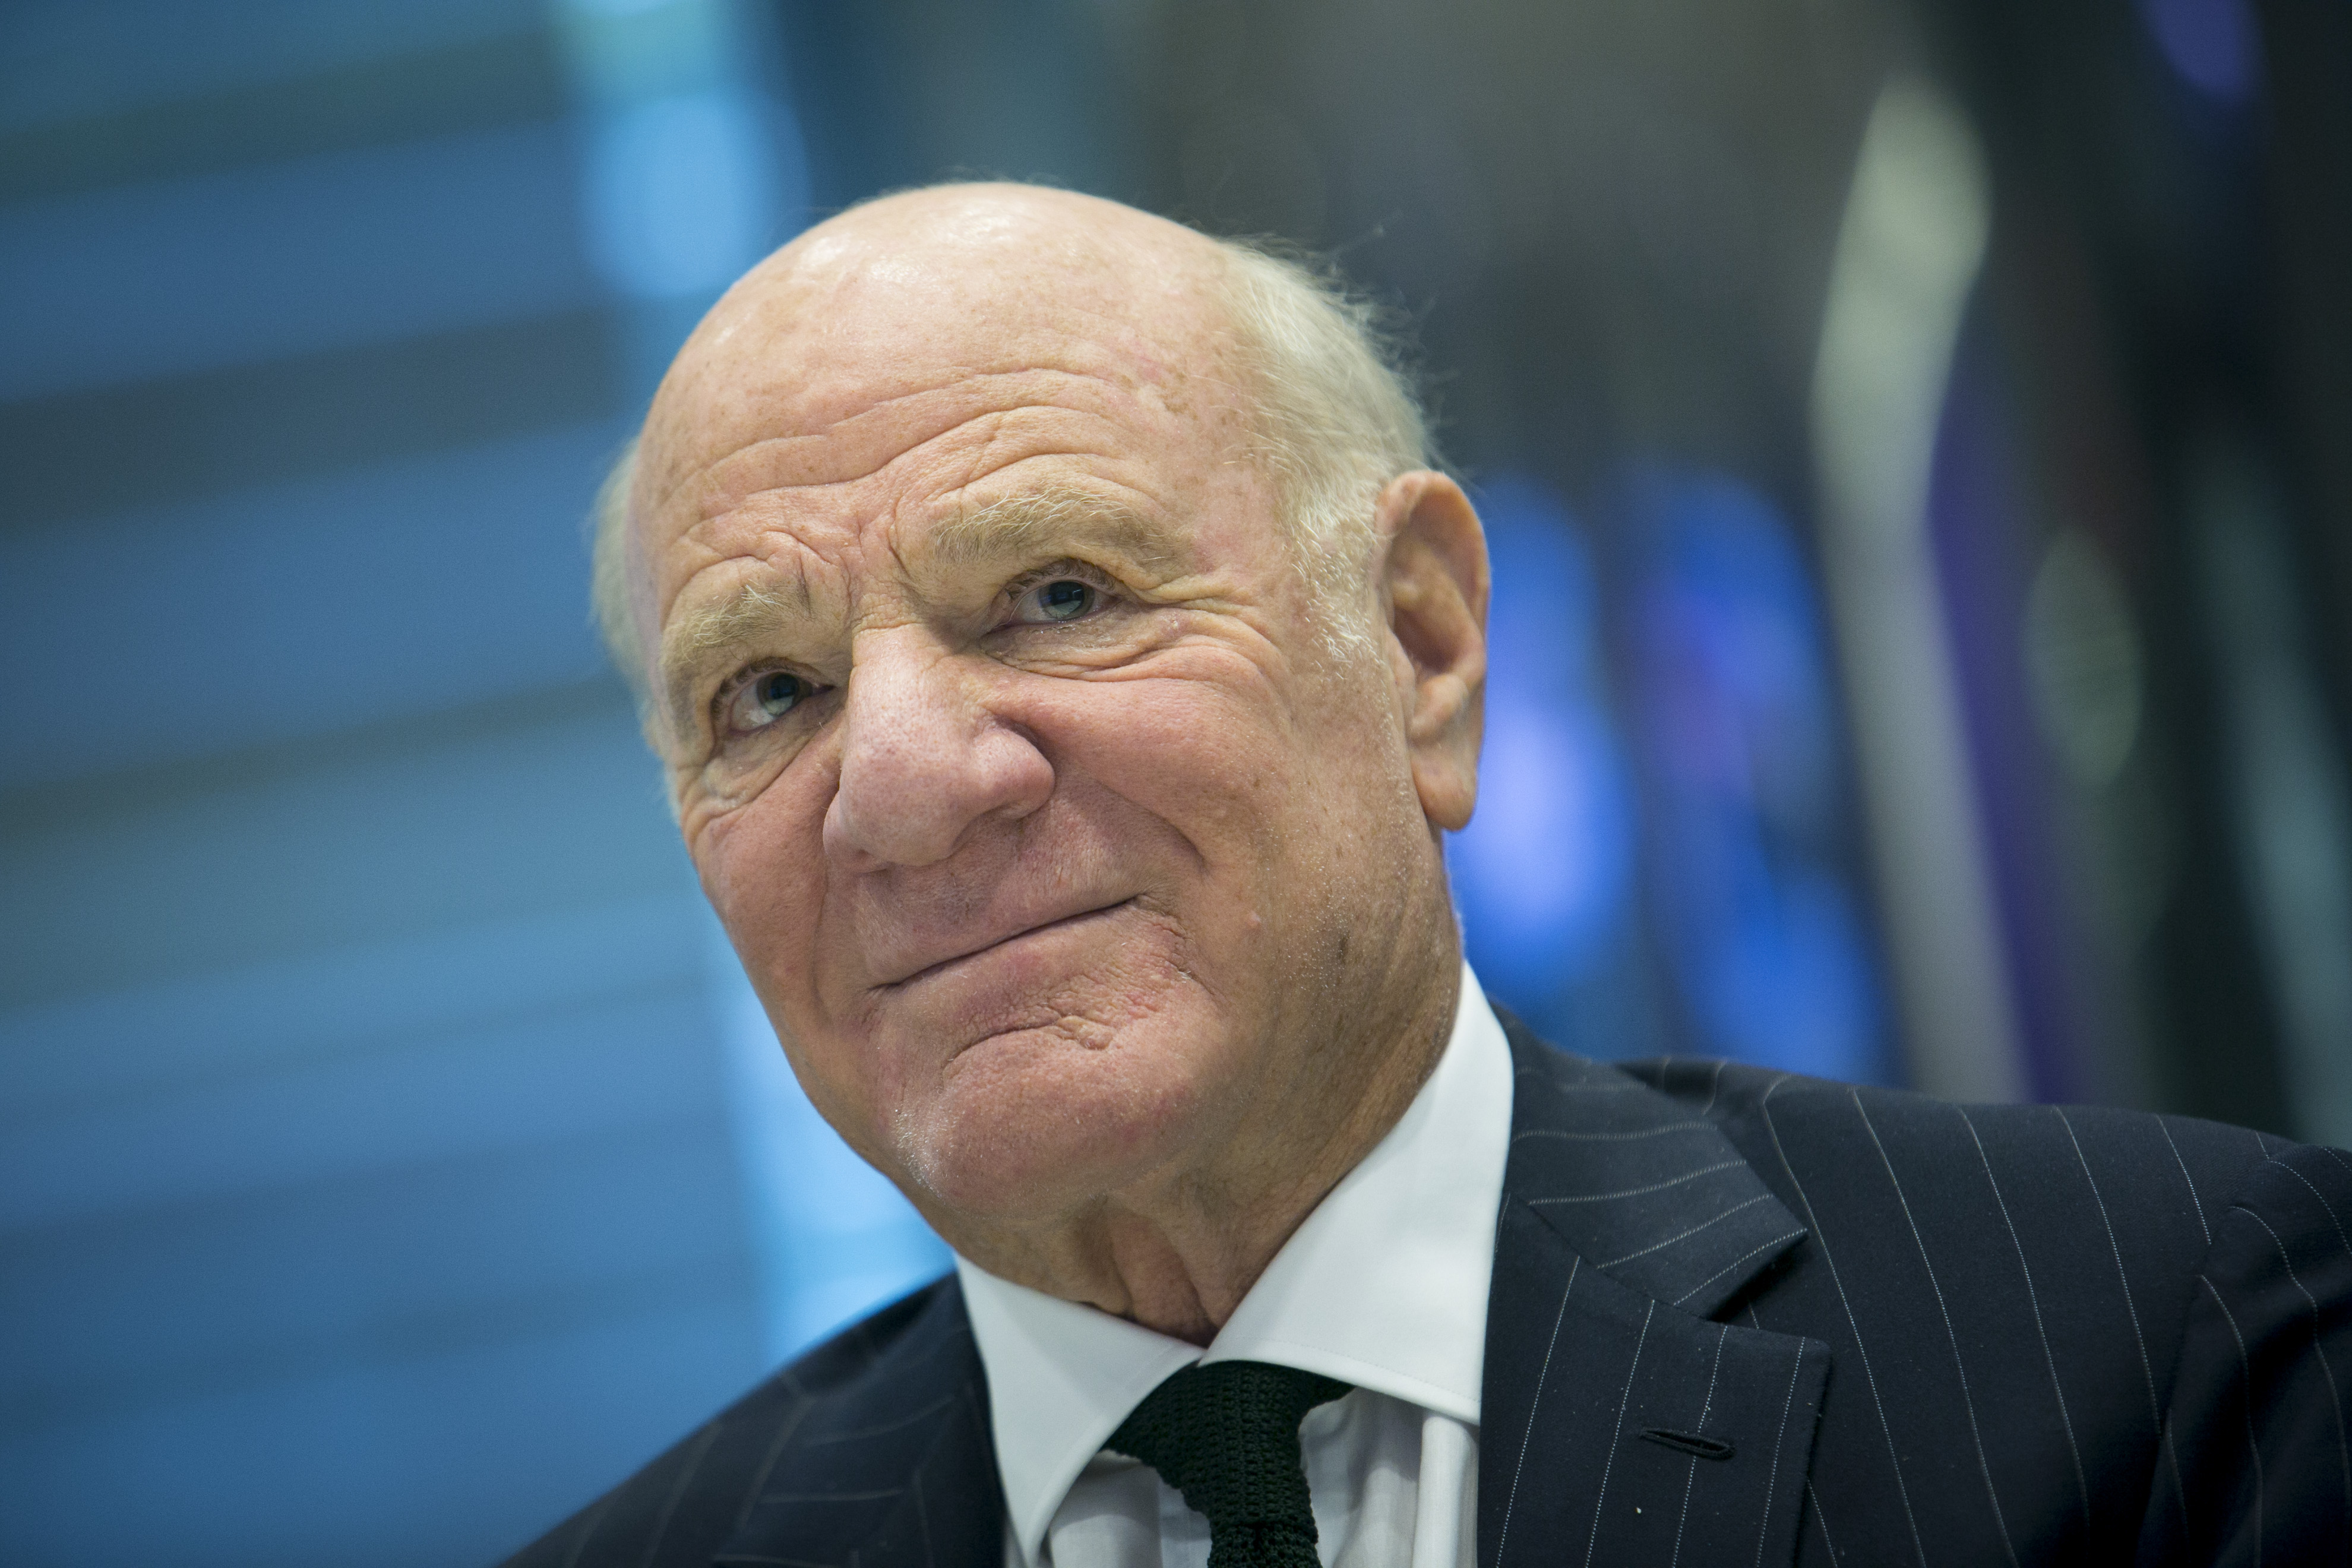 Barry Diller, chairman and chief executive officer of IAC, pauses during an interview in New York City on April 1, 2014 (Scott Eells—Bloomberg/Getty Images)